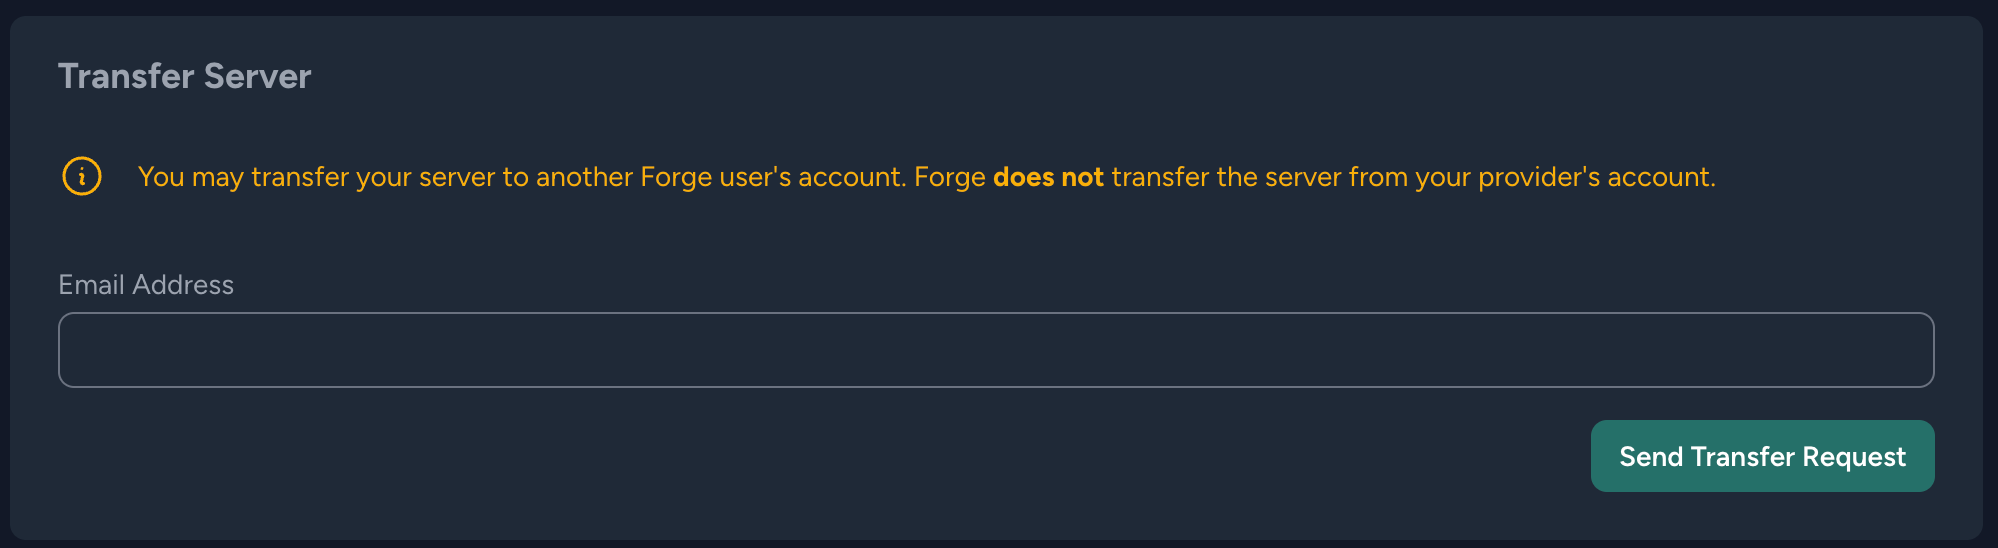 Transfer server between forge accounts